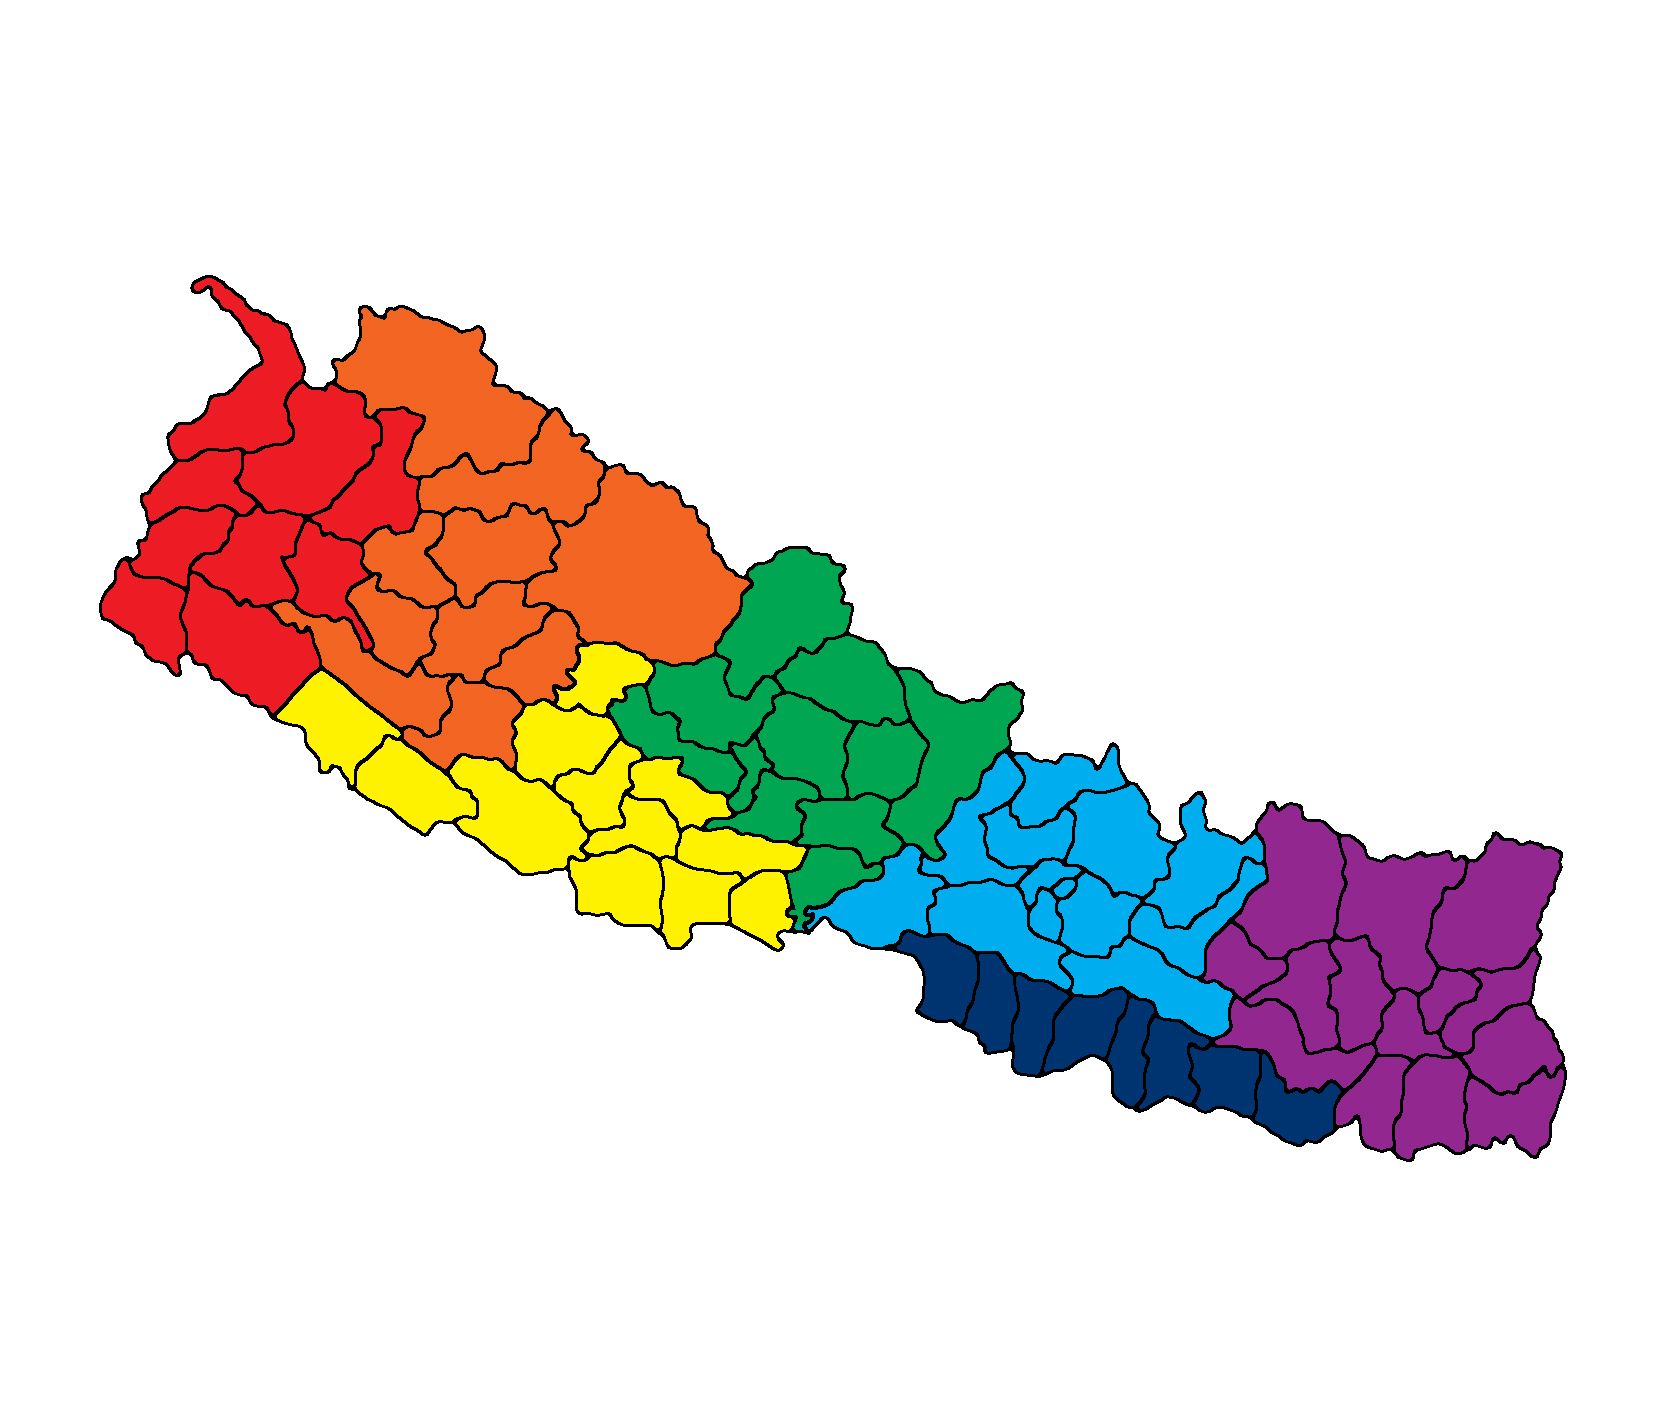 seven province map of nepal